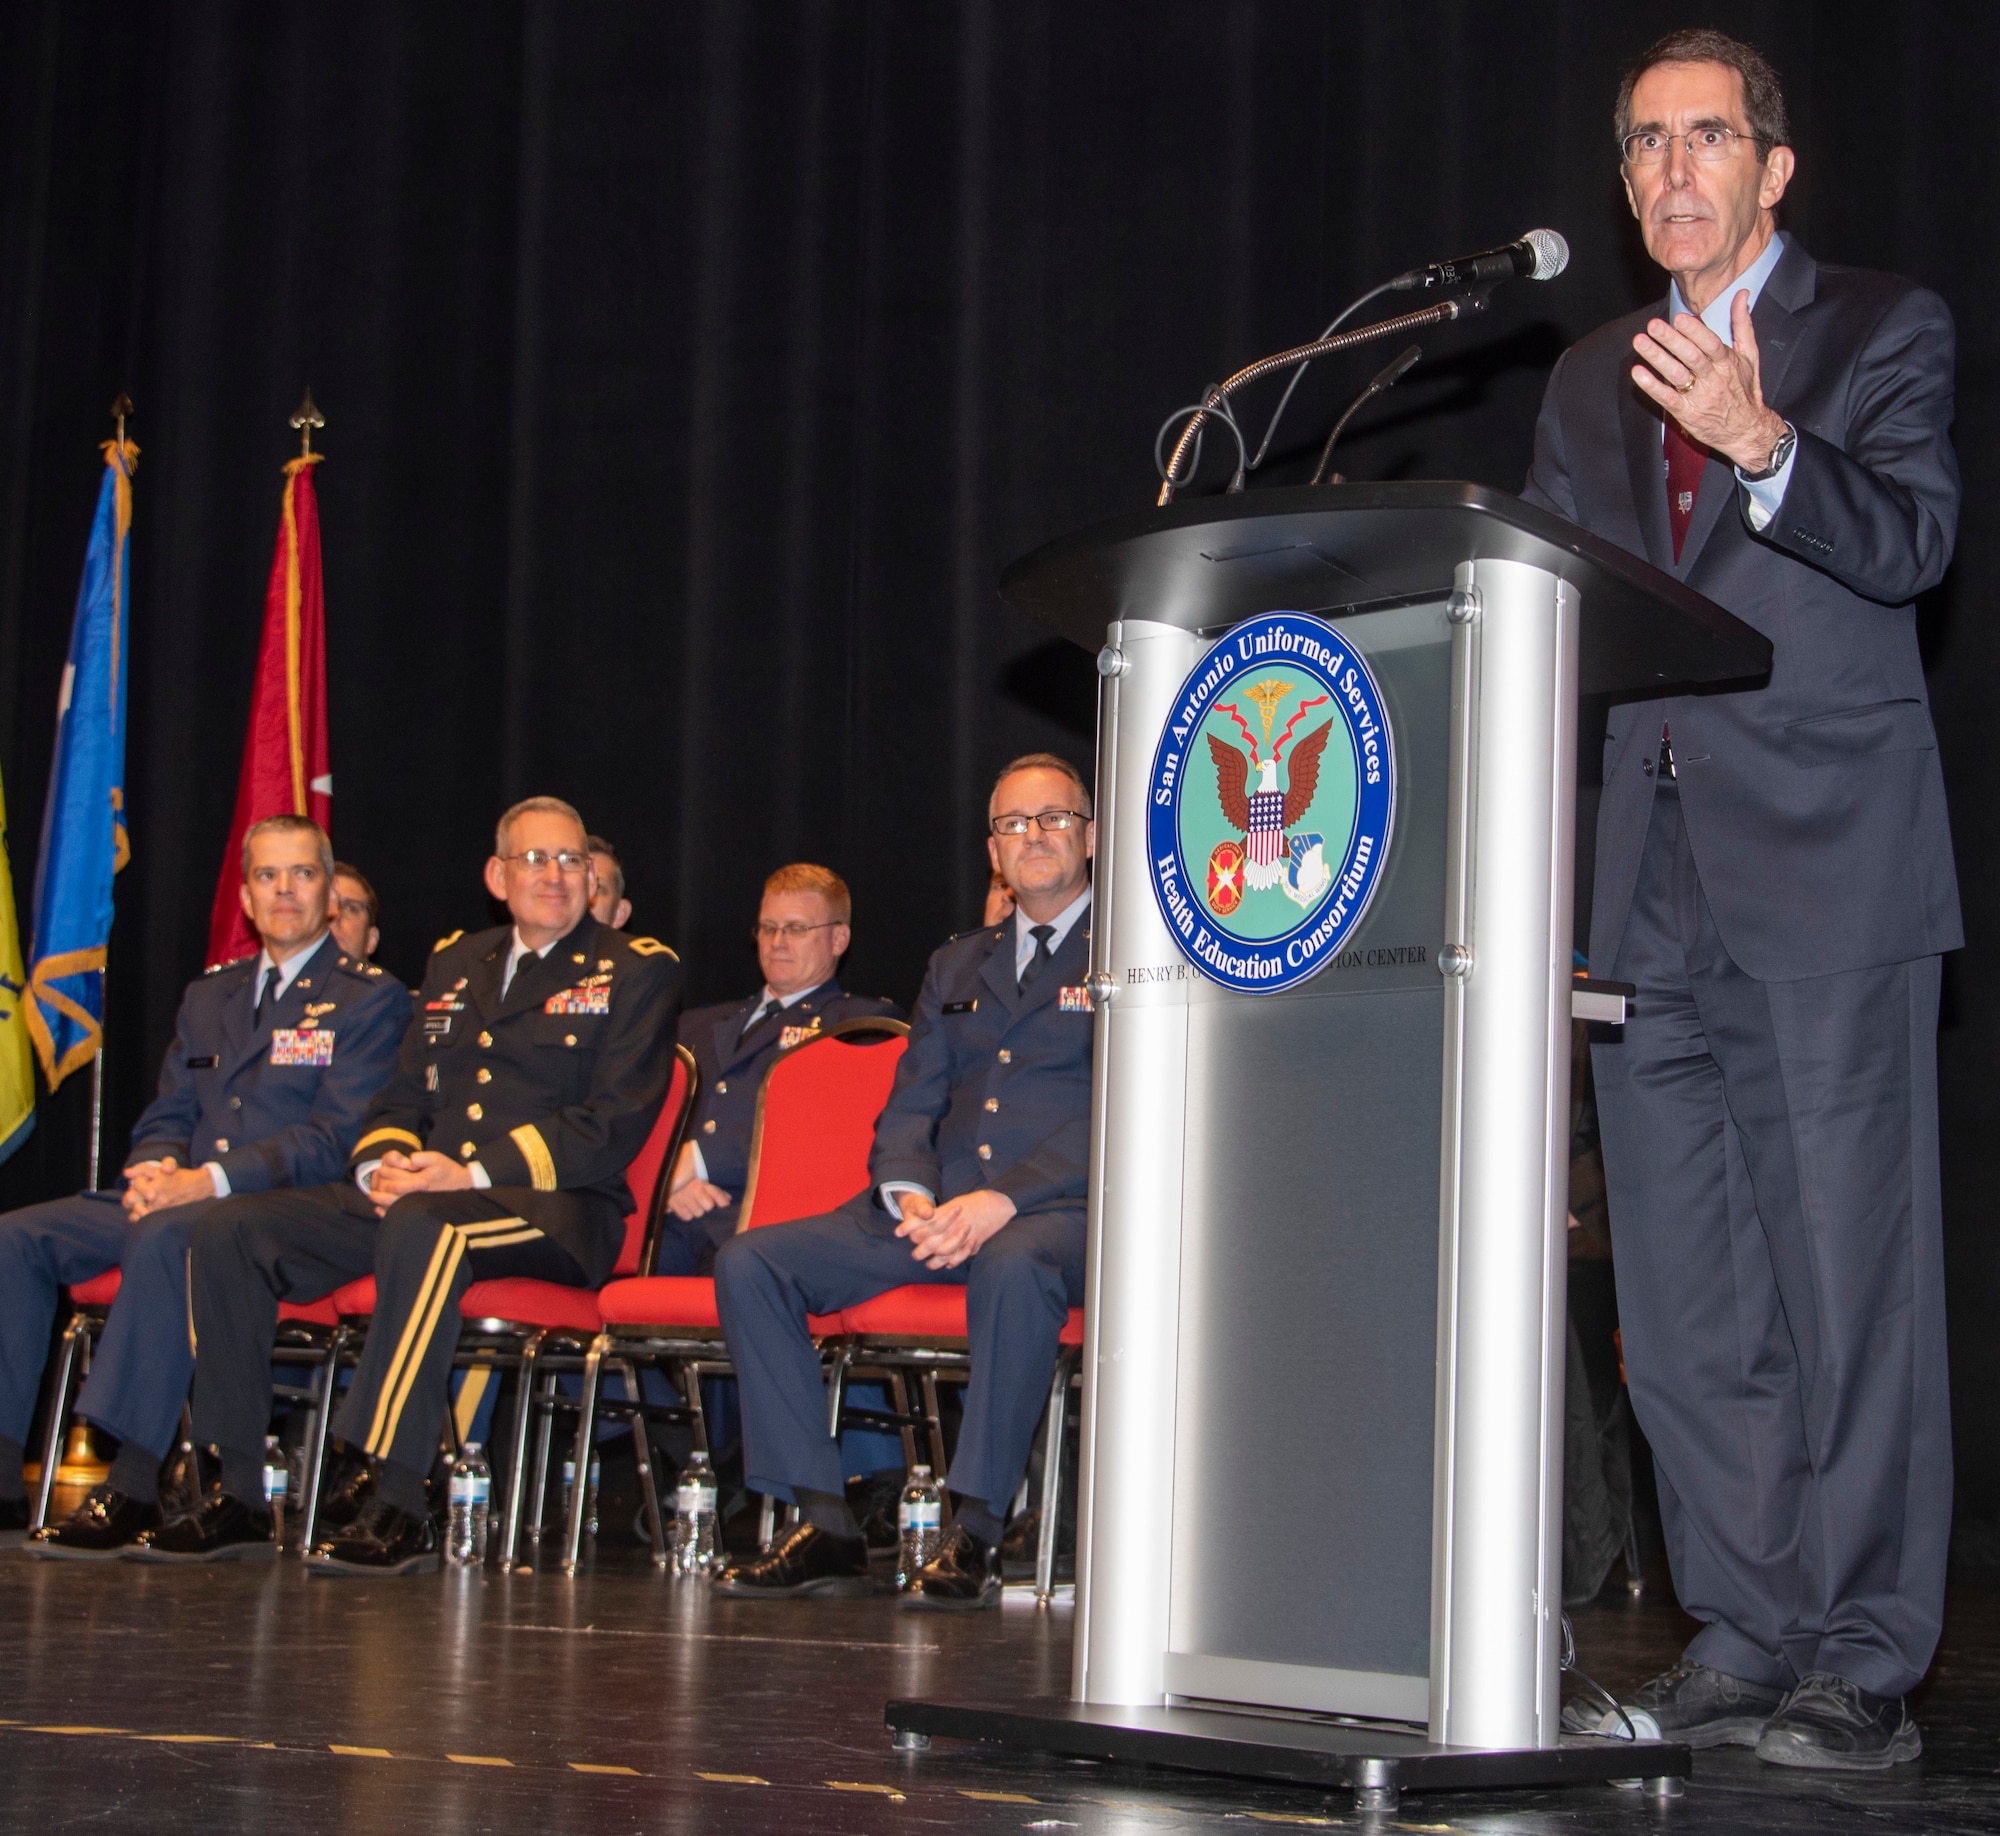 Dr. Arthur L. Kellermann, dean of the F. Edward Hebert School of Medicine, Uniformed Services University, speaks during the San Antonio Uniformed Services Health Education Consortium graduation ceremony at the Lila Cockrell Theatre in downtown San Antonio June 7. The ceremony honored 228 Army, Air Force, Navy, Public Health and civilian medical education and allied health graduates.